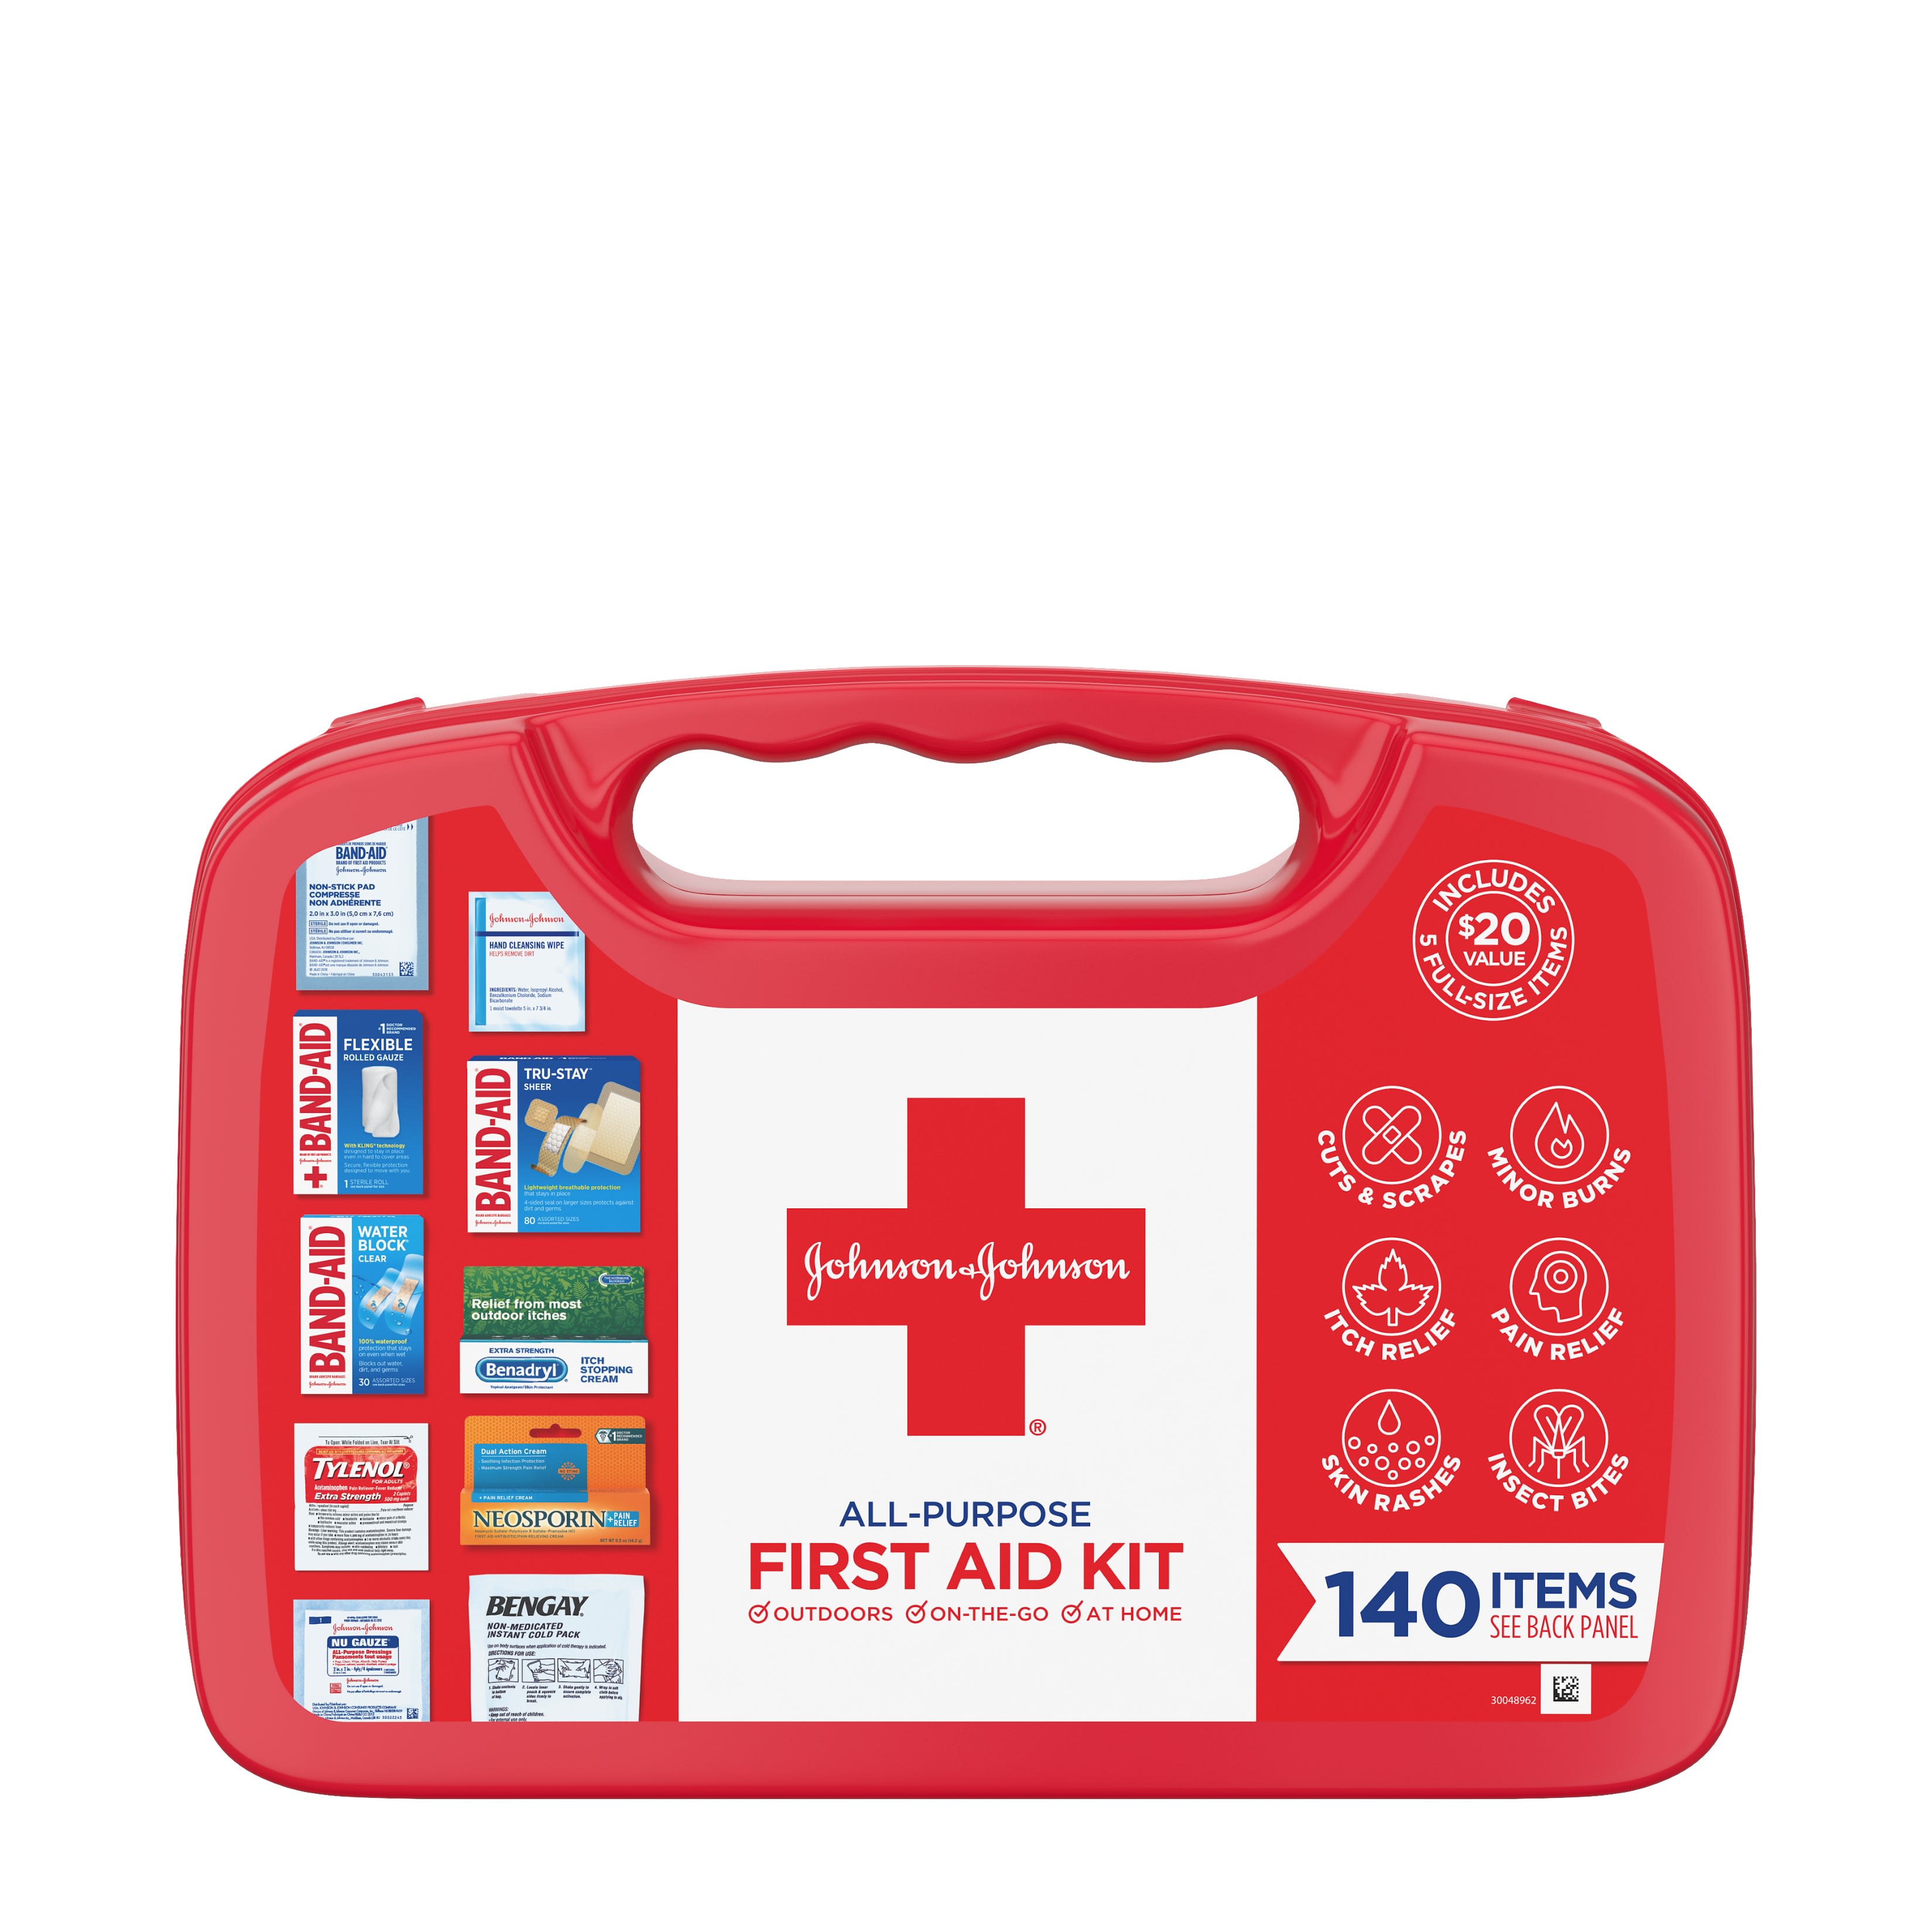 Johnson & Johnson All-Purpose Portable Compact First Aid Kit, 140 pc - image 1 of 11